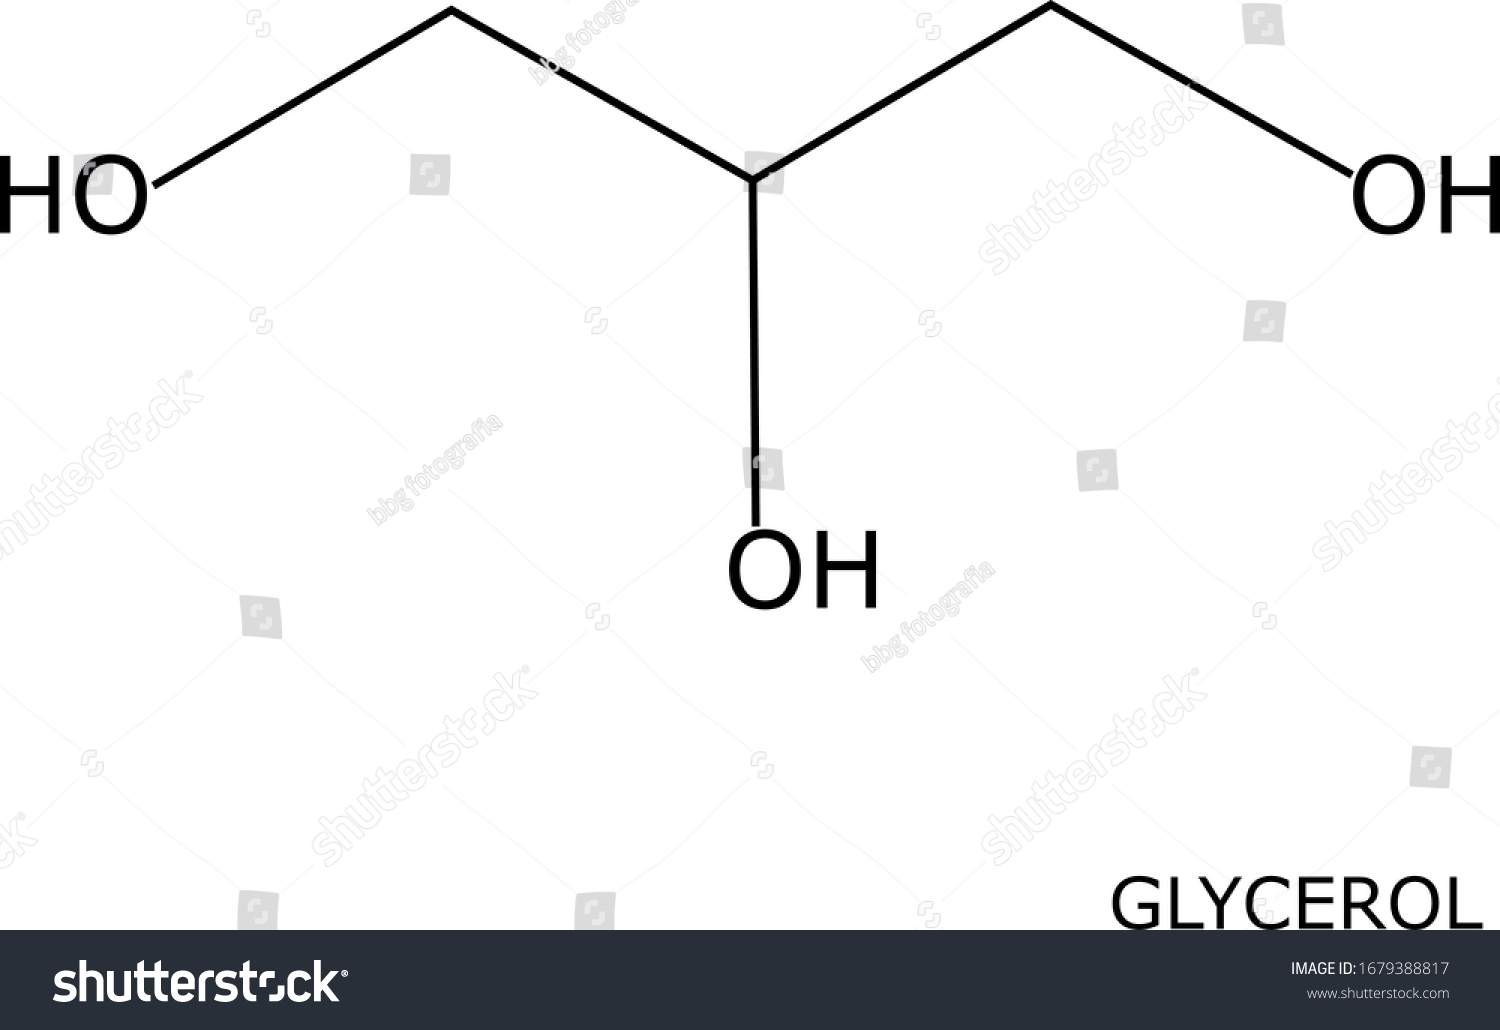 SVG of Glycerol molecule on black, over a white background, with its name svg